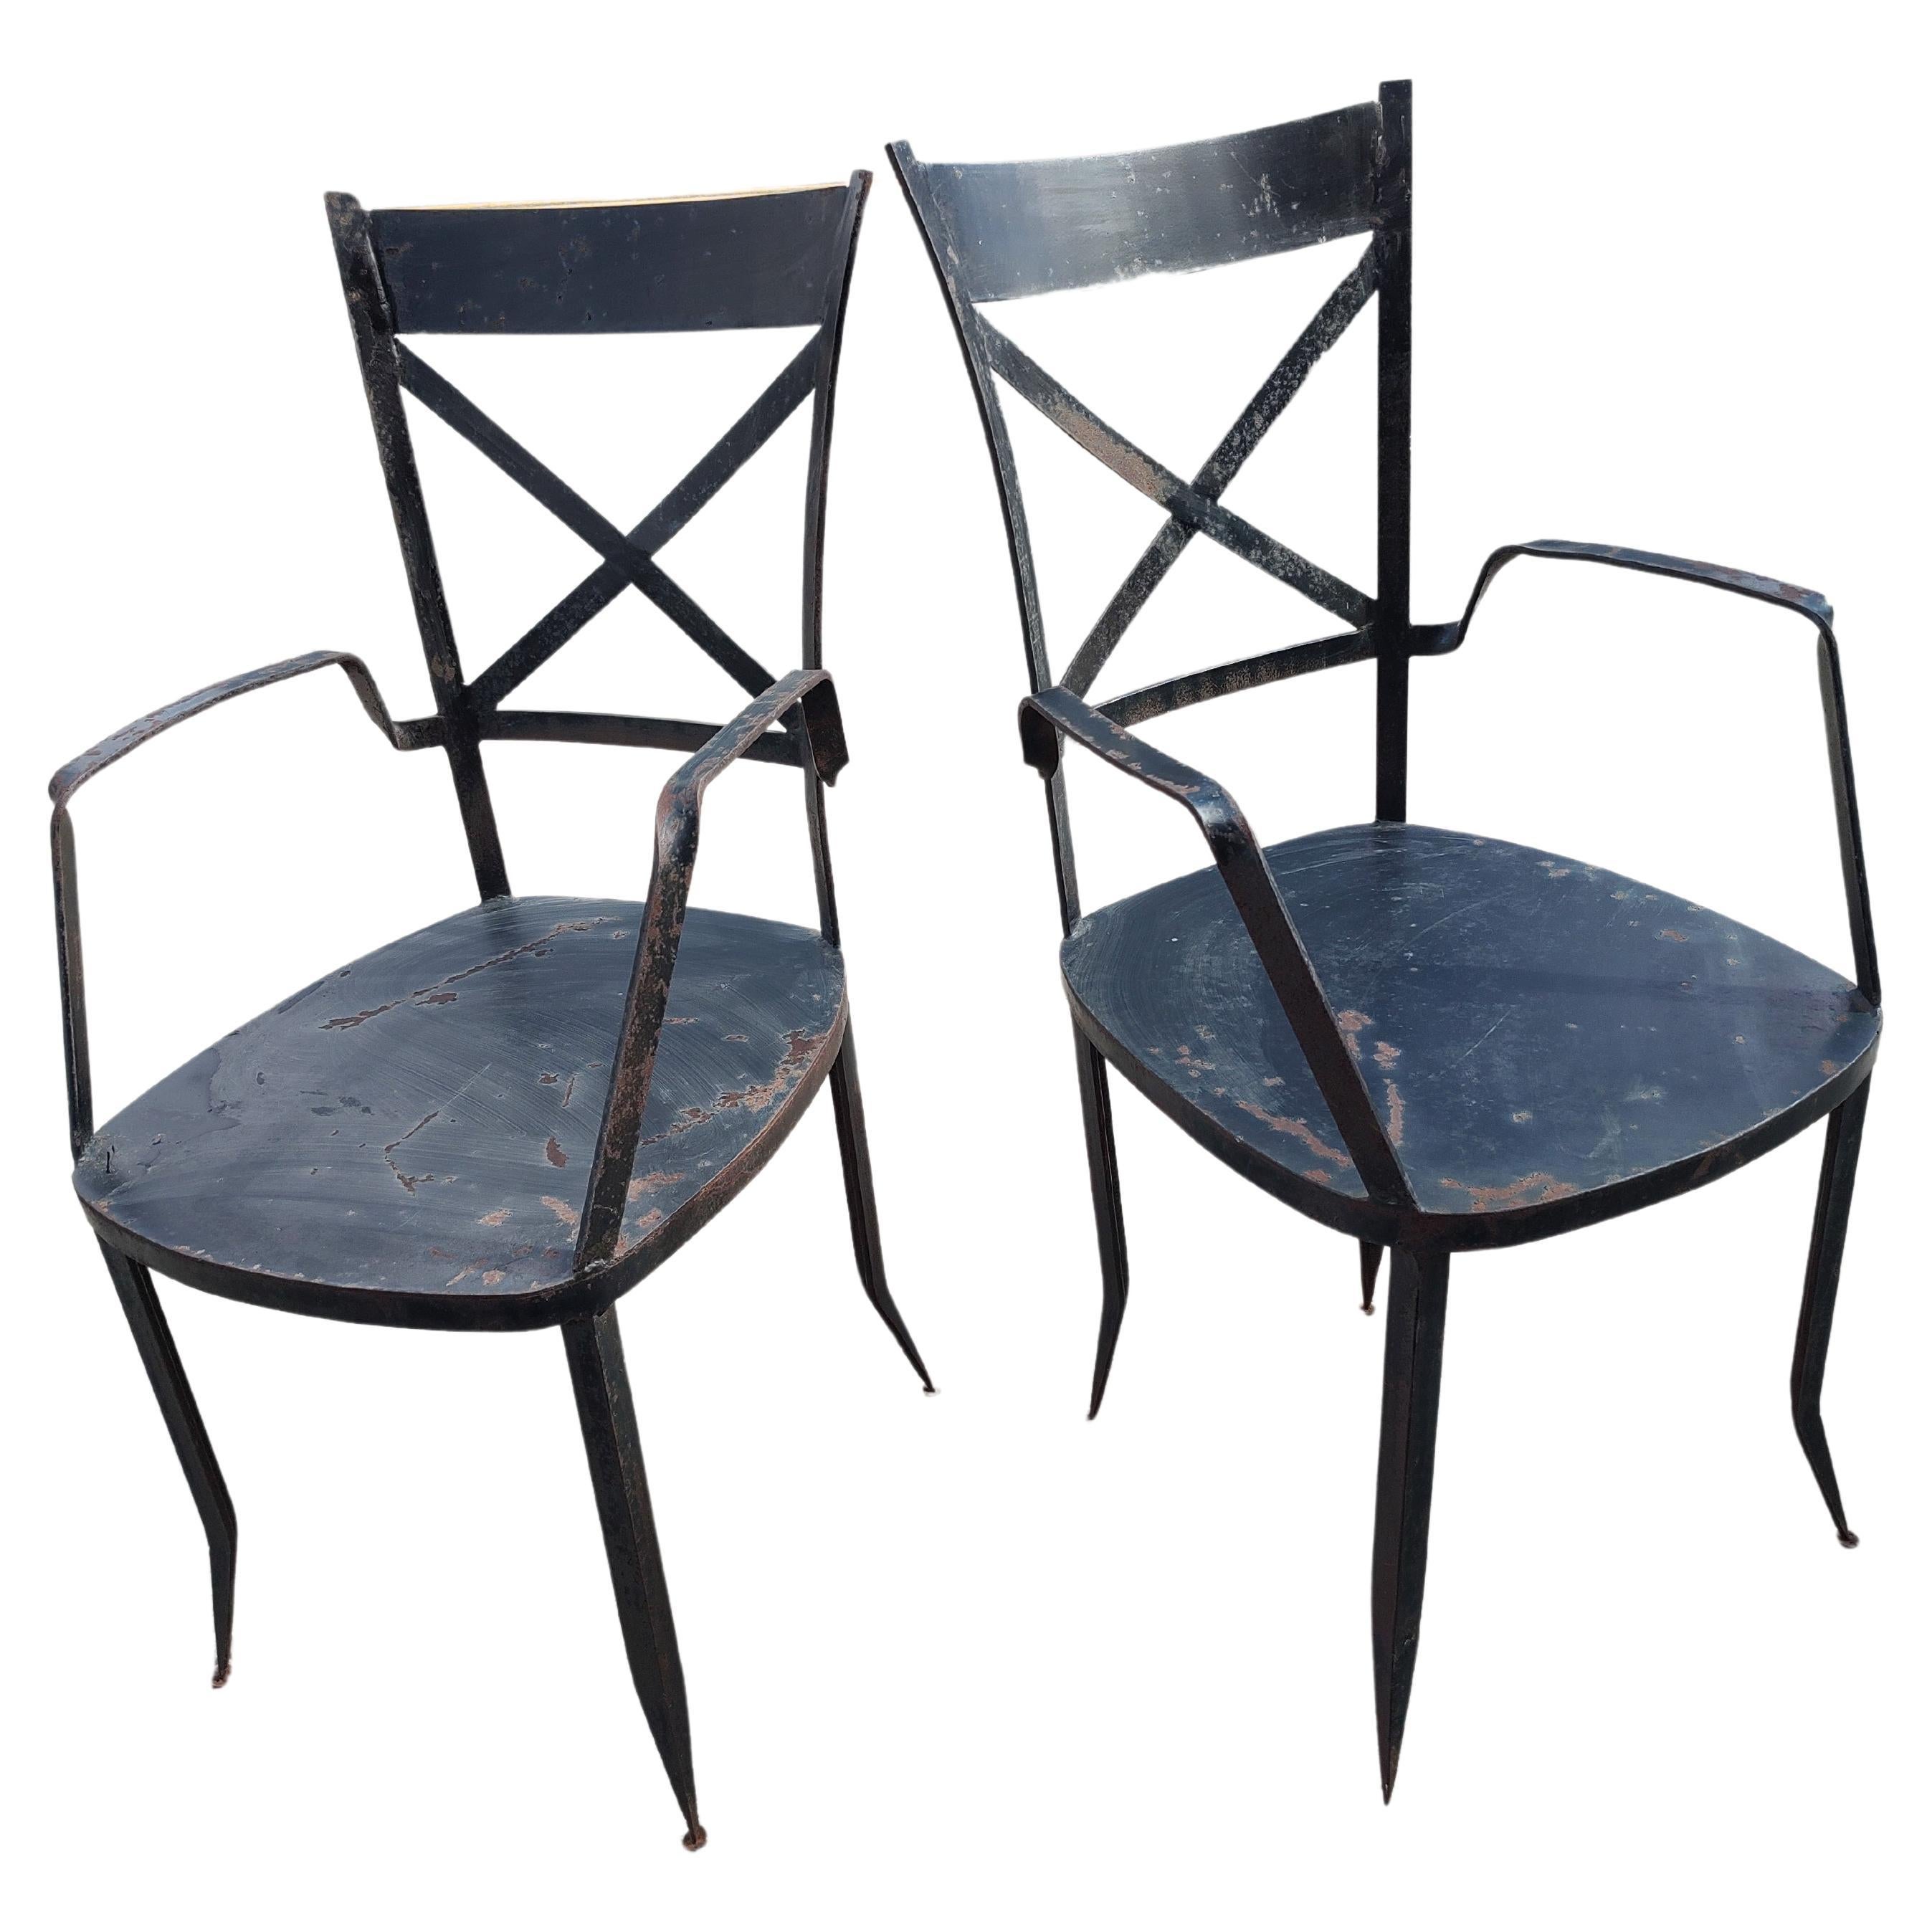 Pair of Heavy Duty High Quality Iron Modern Sculptural Garden Patio Armchairs   For Sale 5